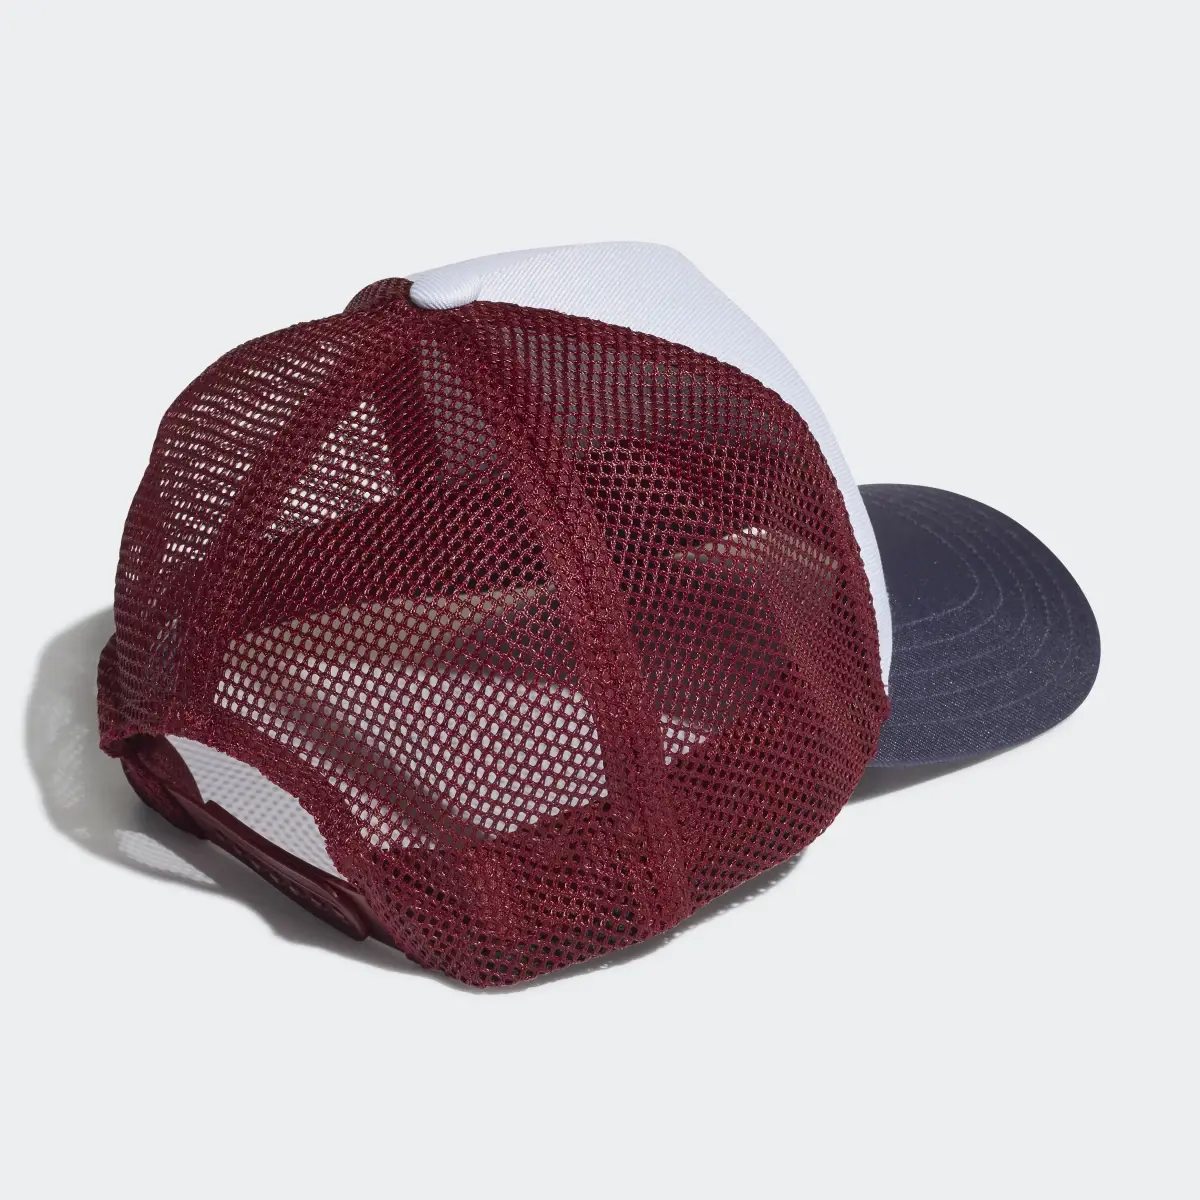 Adidas Casquette Snapback Curved Trucker. 3